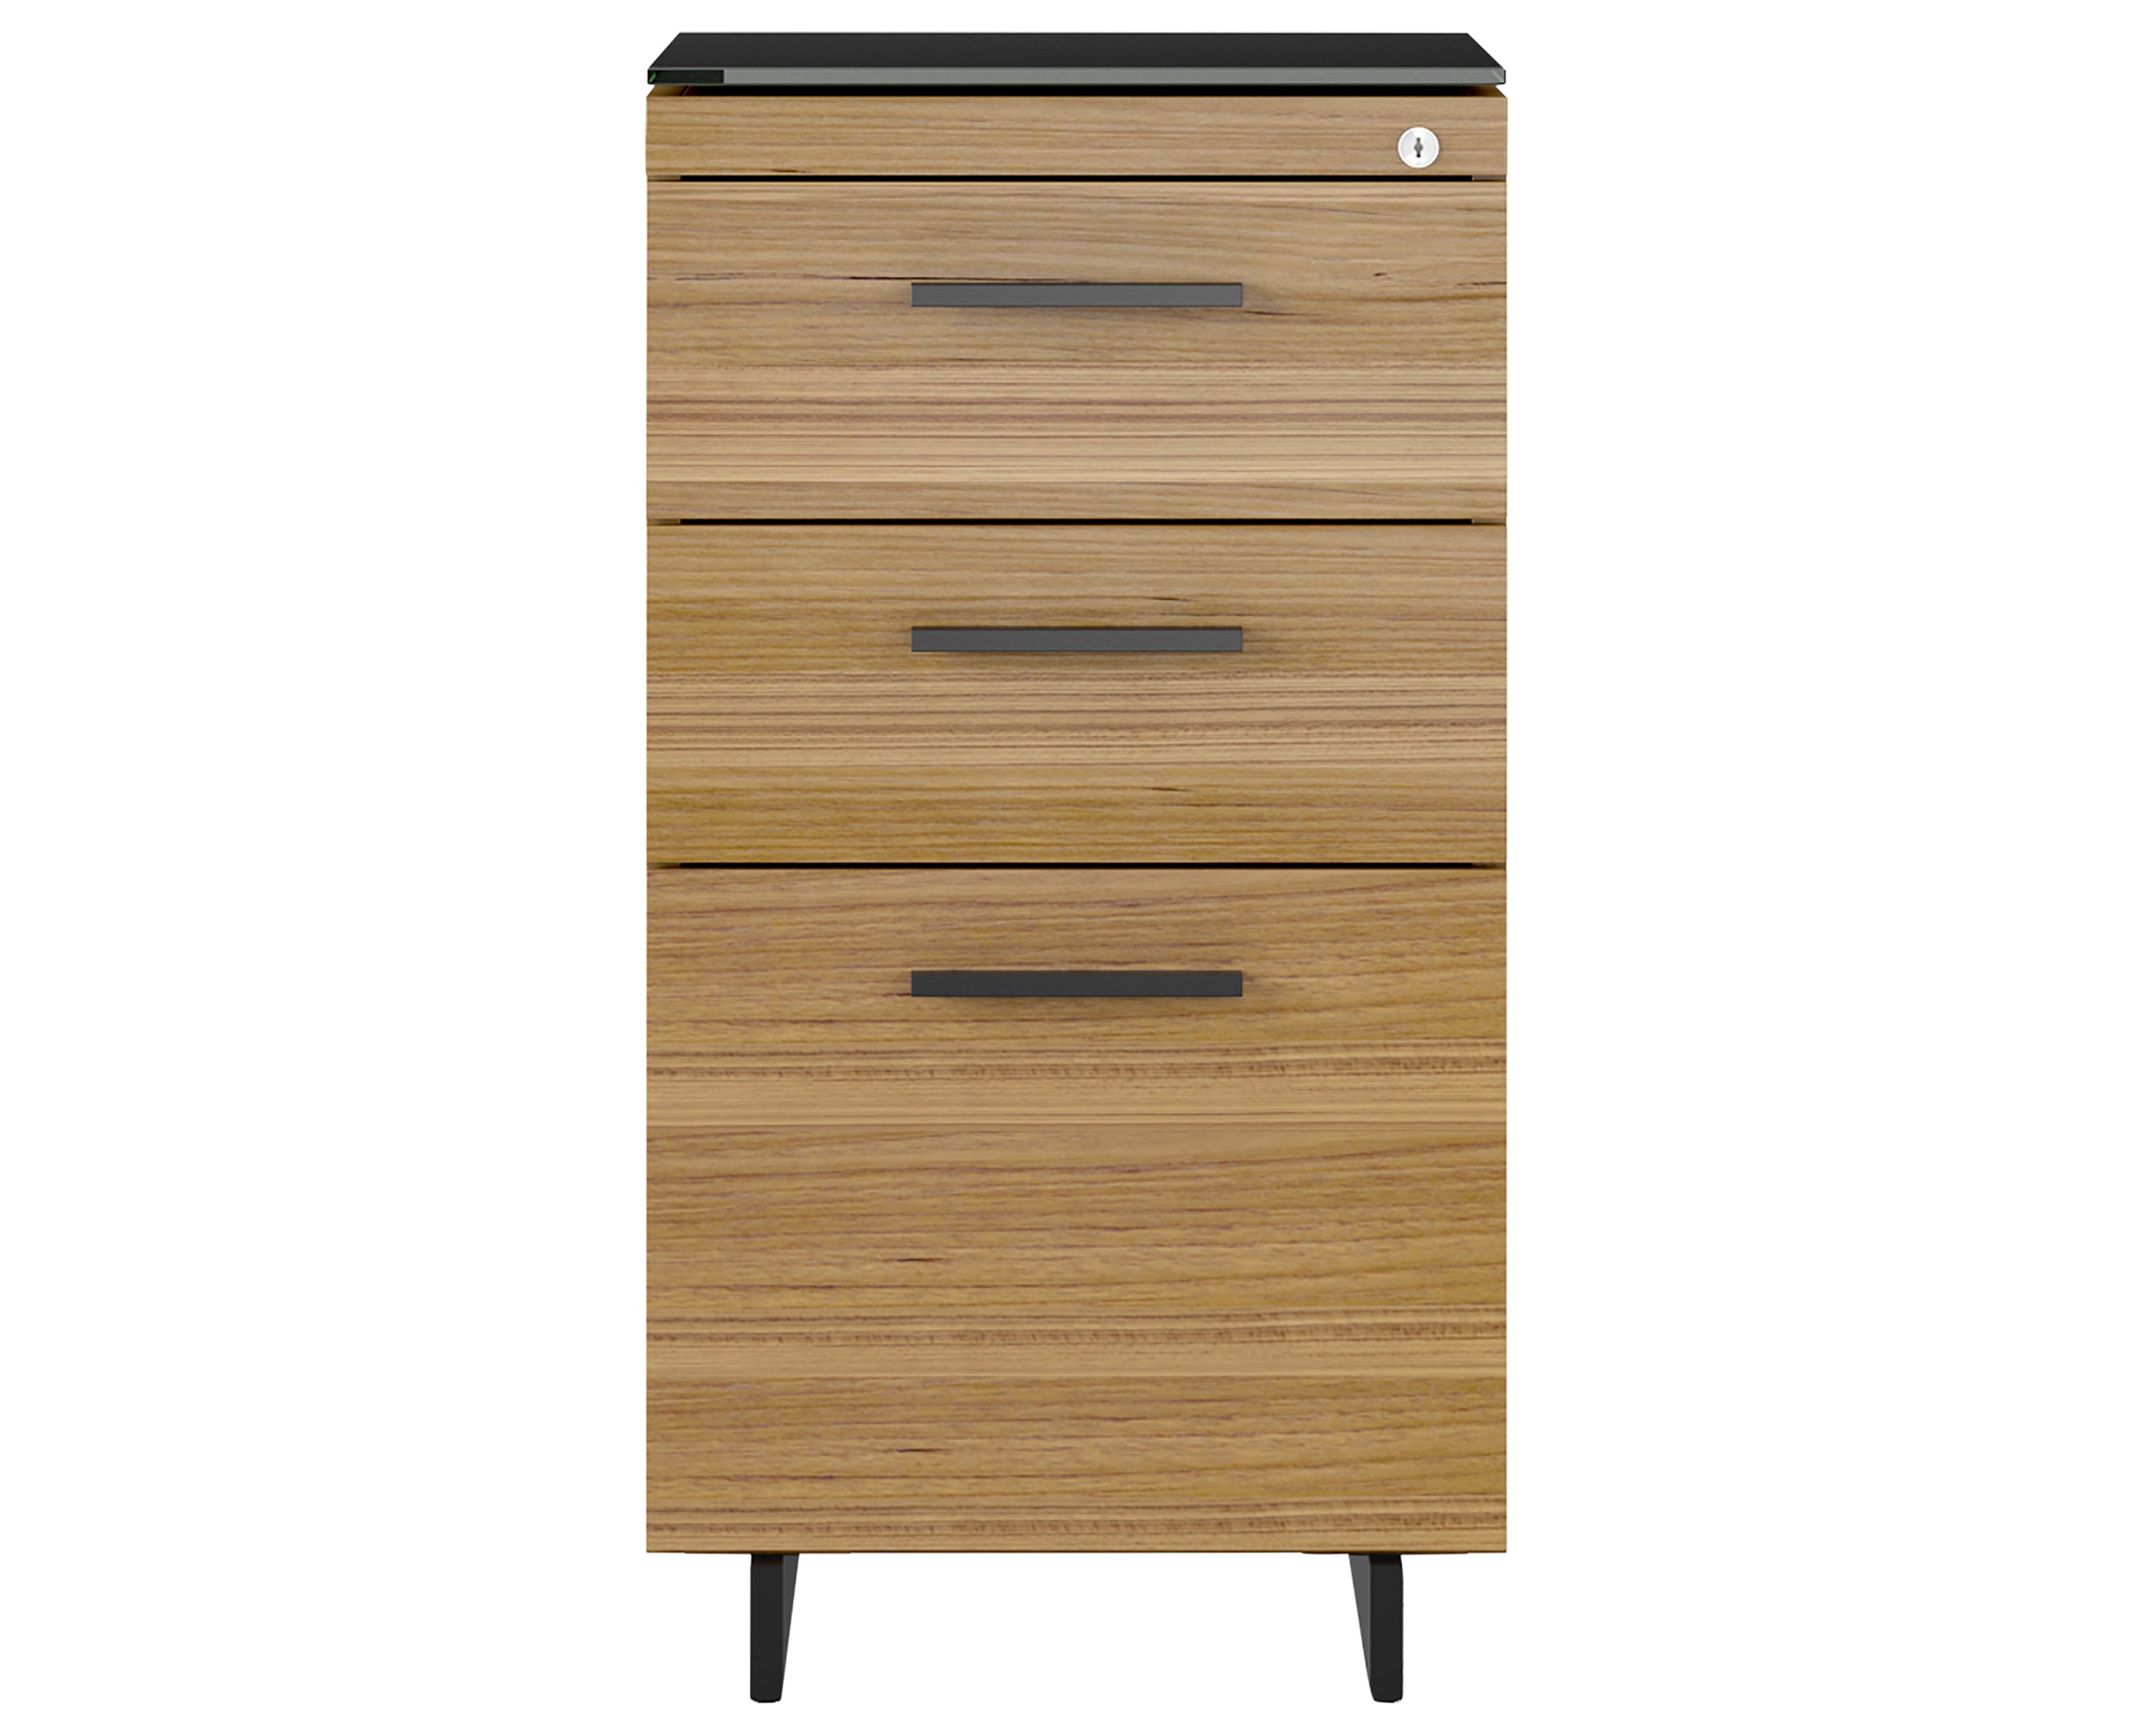 Natural Walnut Veneer and Black Satin-Etched Glass with Black Steel | BDI Sequel 3 Drawer File Cabinet | Valley Ridge Furniture